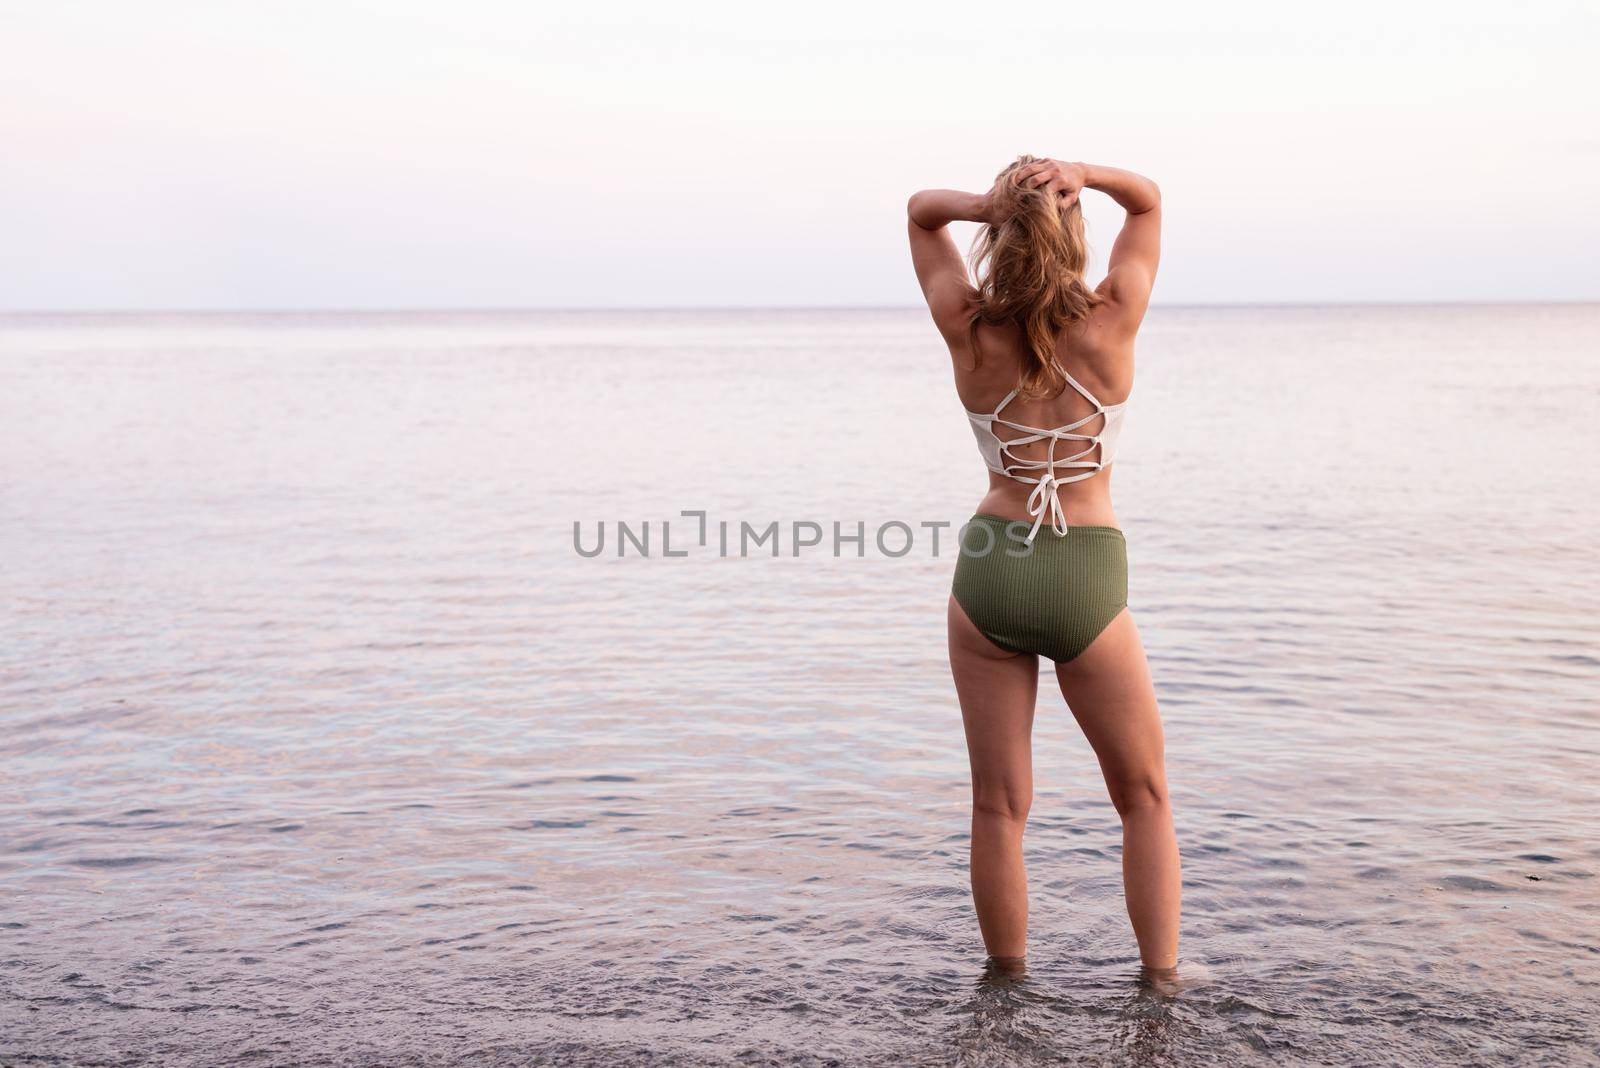 Summer vacation. Rear view of a young woman standing on stony beach looking at the sea, hands on head